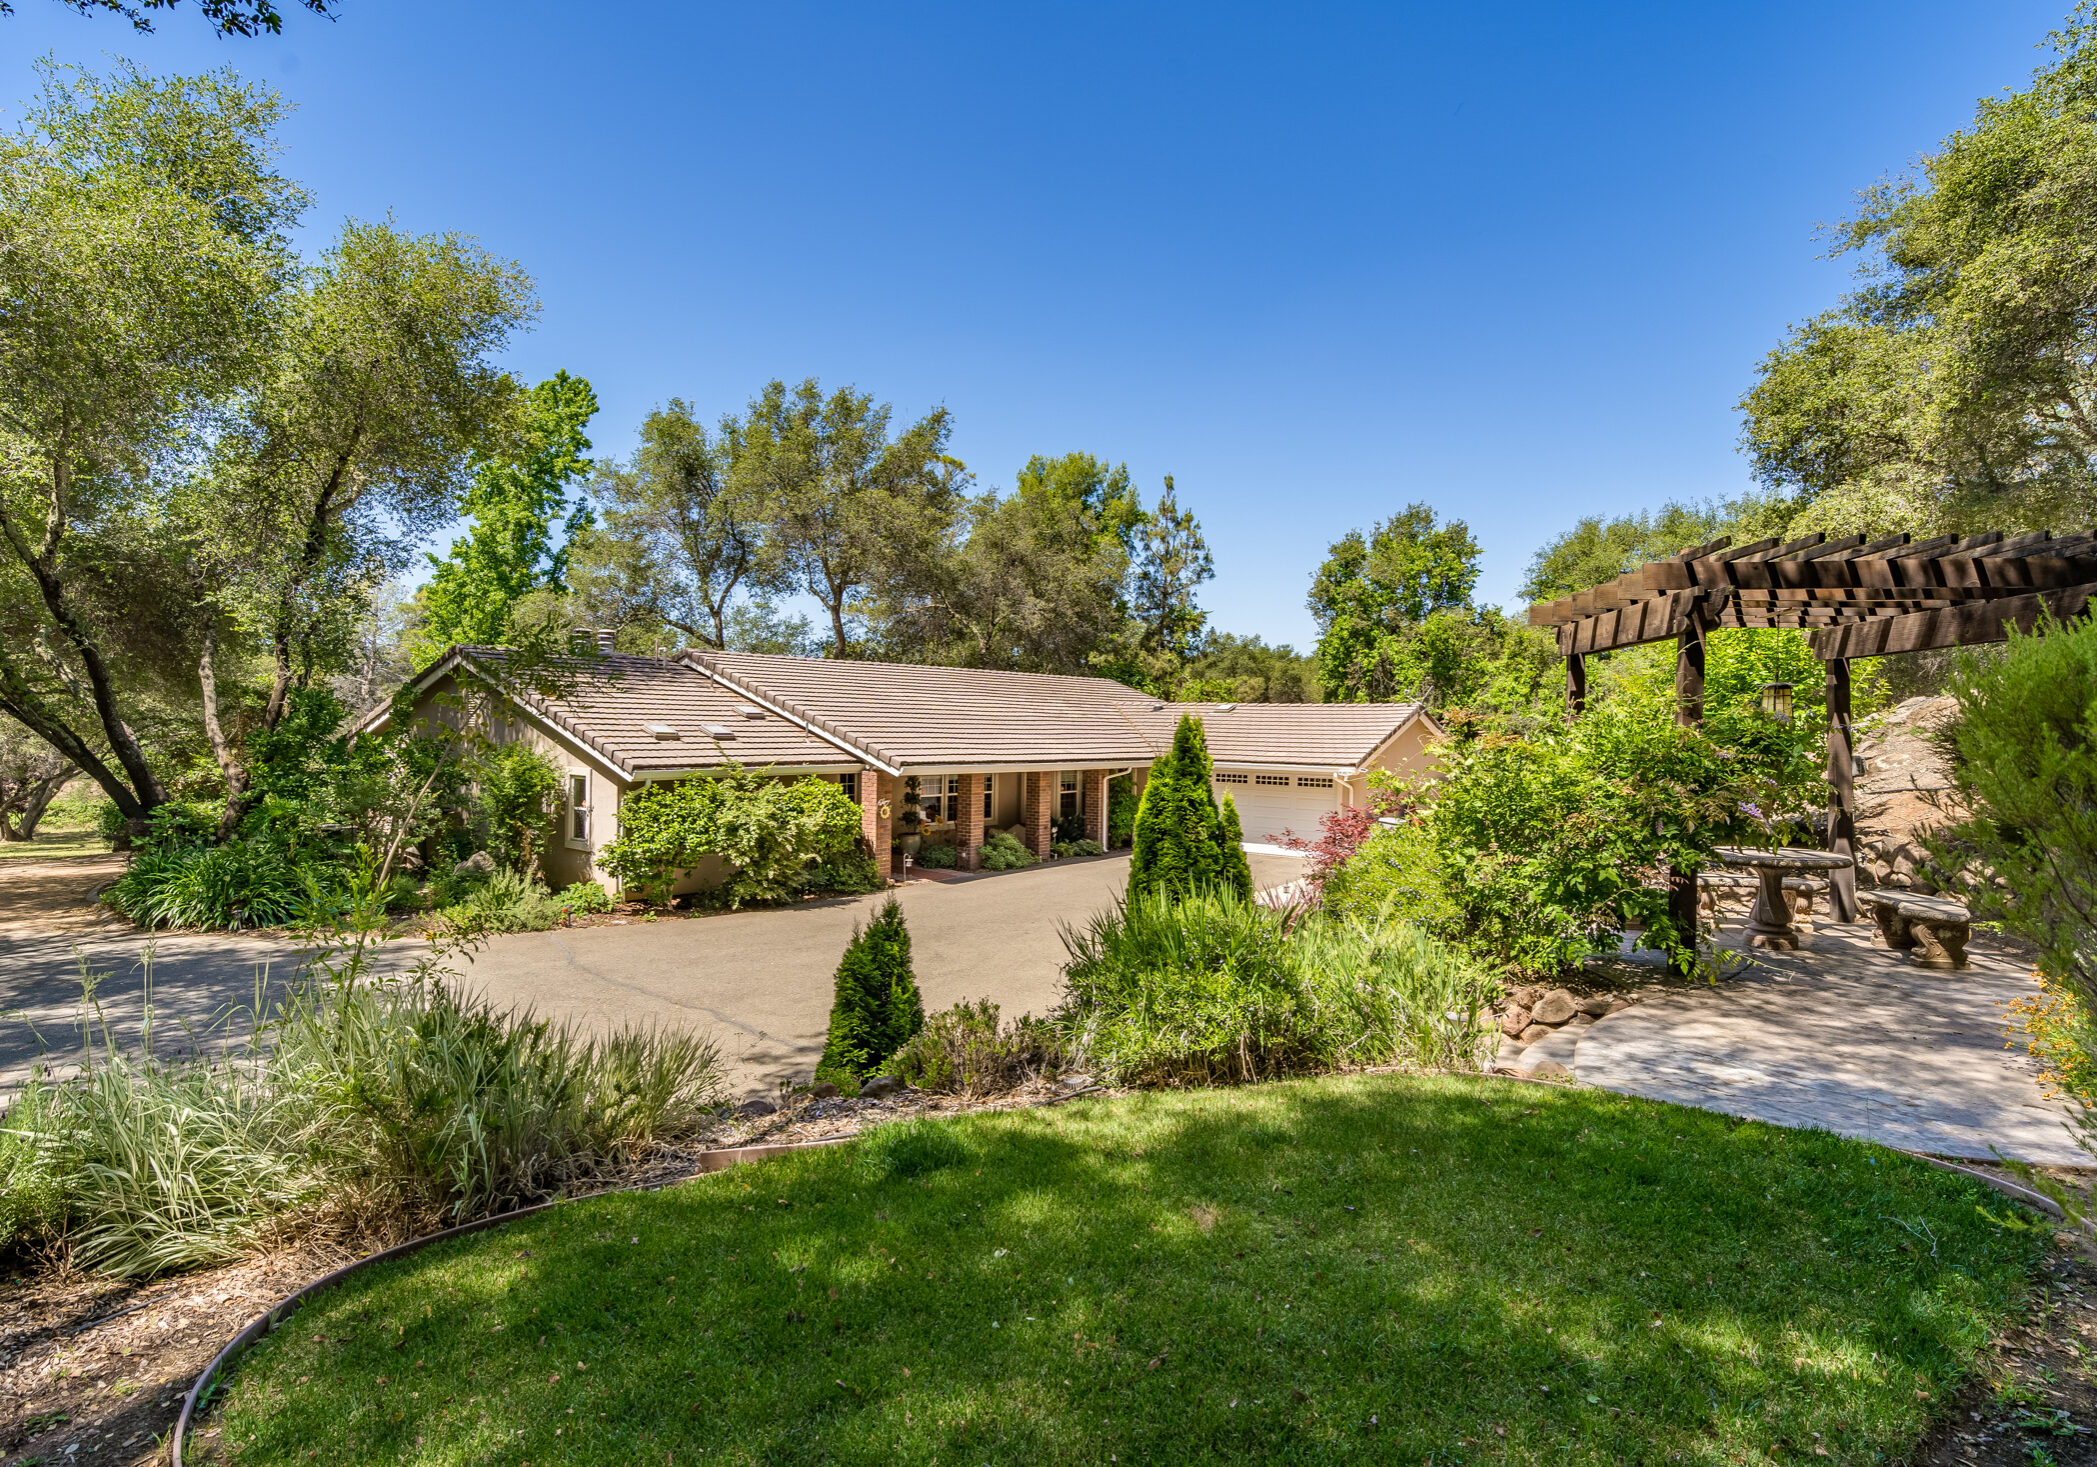 8537 Willow Valley Pl, Granite Bay, CA 95746
<br/>
$900,000